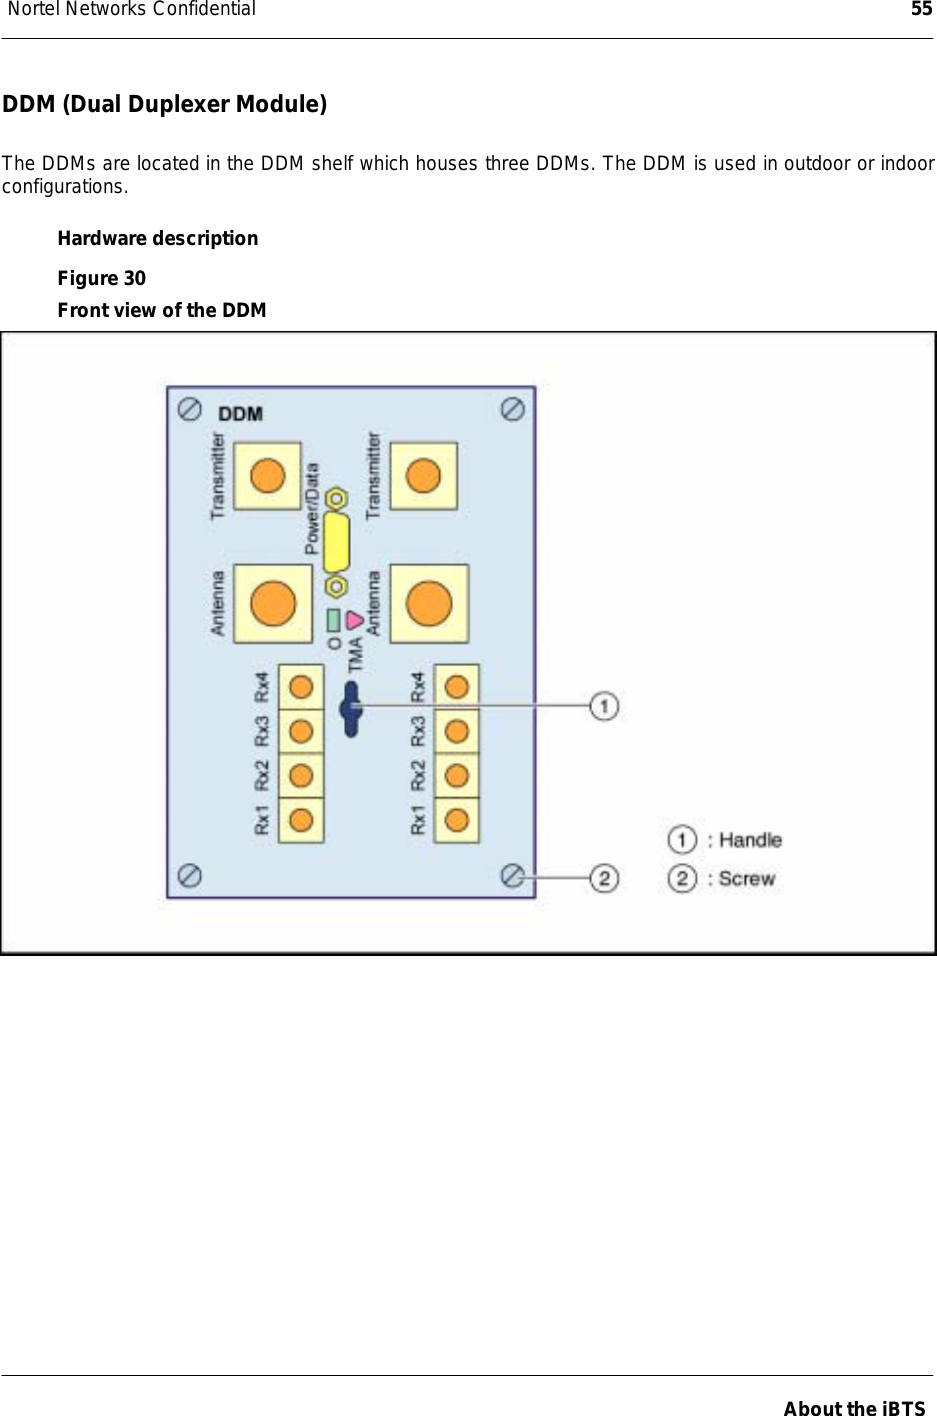 Nortel Networks Confidential 55About the iBTSDDM (Dual Duplexer Module)The DDMs are located in the DDM shelf which houses three DDMs. The DDM is used in outdoor or indoorconfigurations.Hardware descriptionFigure 30Front view of the DDM